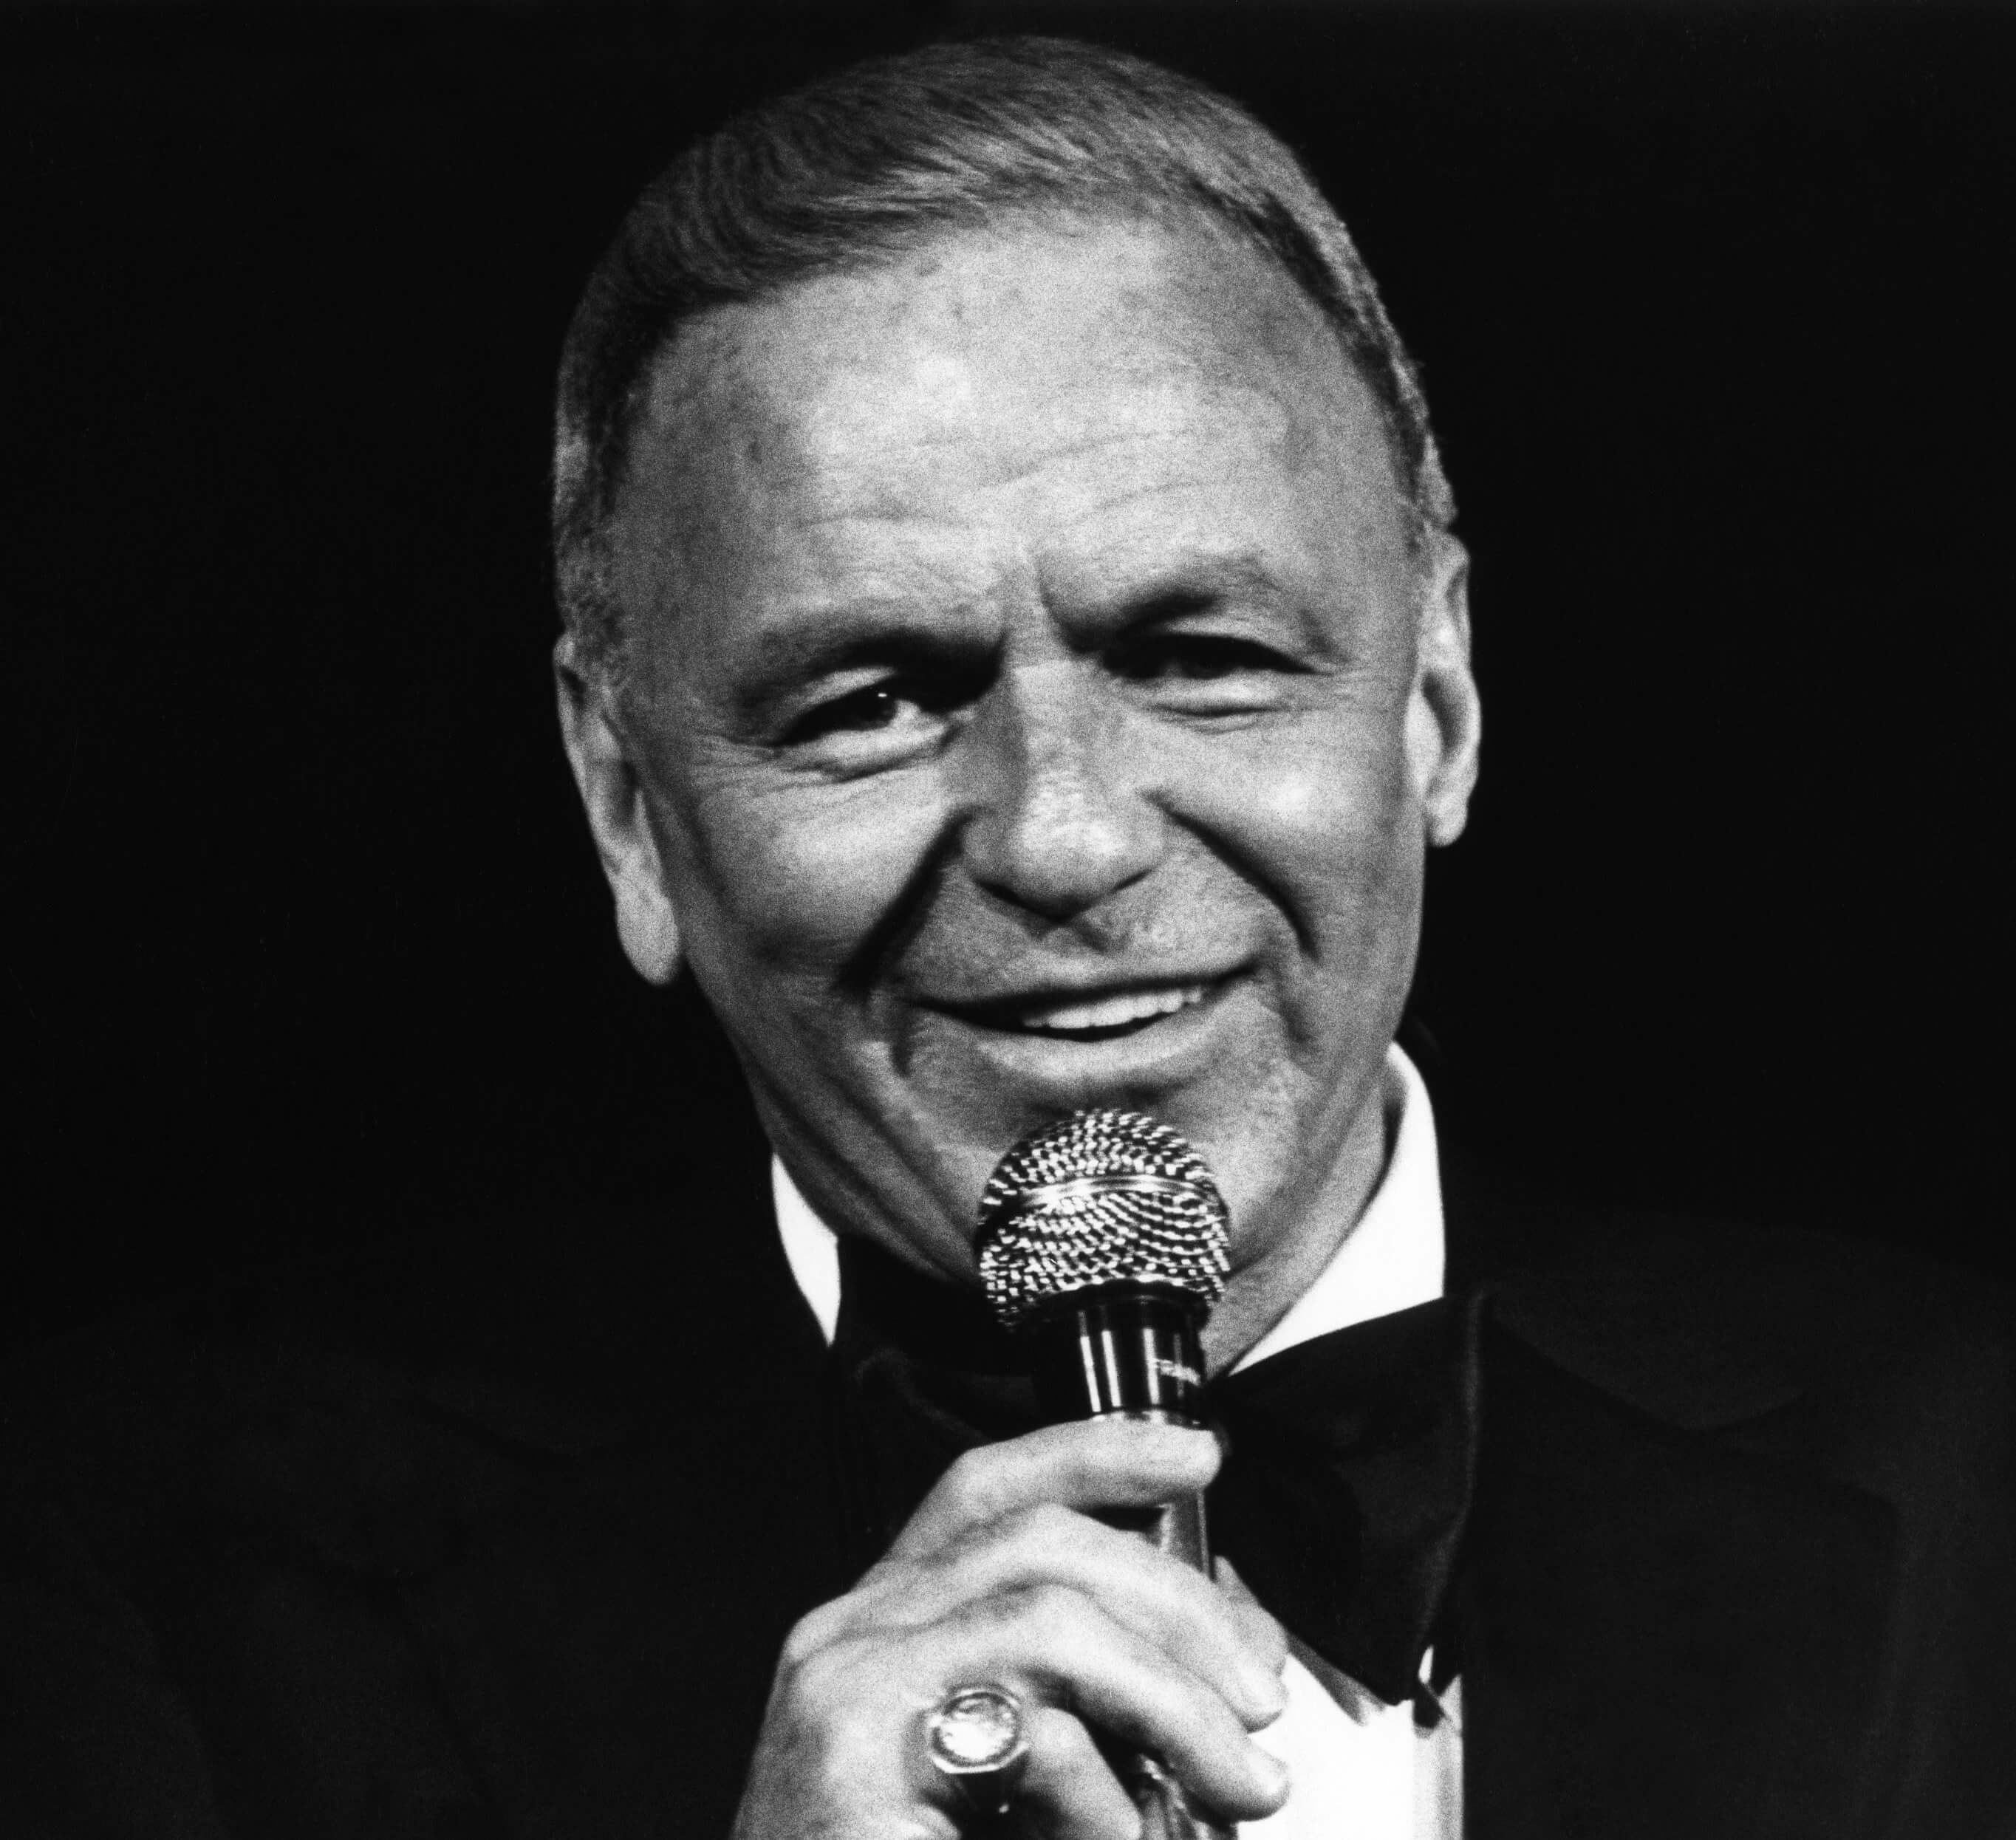 "My Way" singer Frank Sinatra holding a microphone in black-and-white